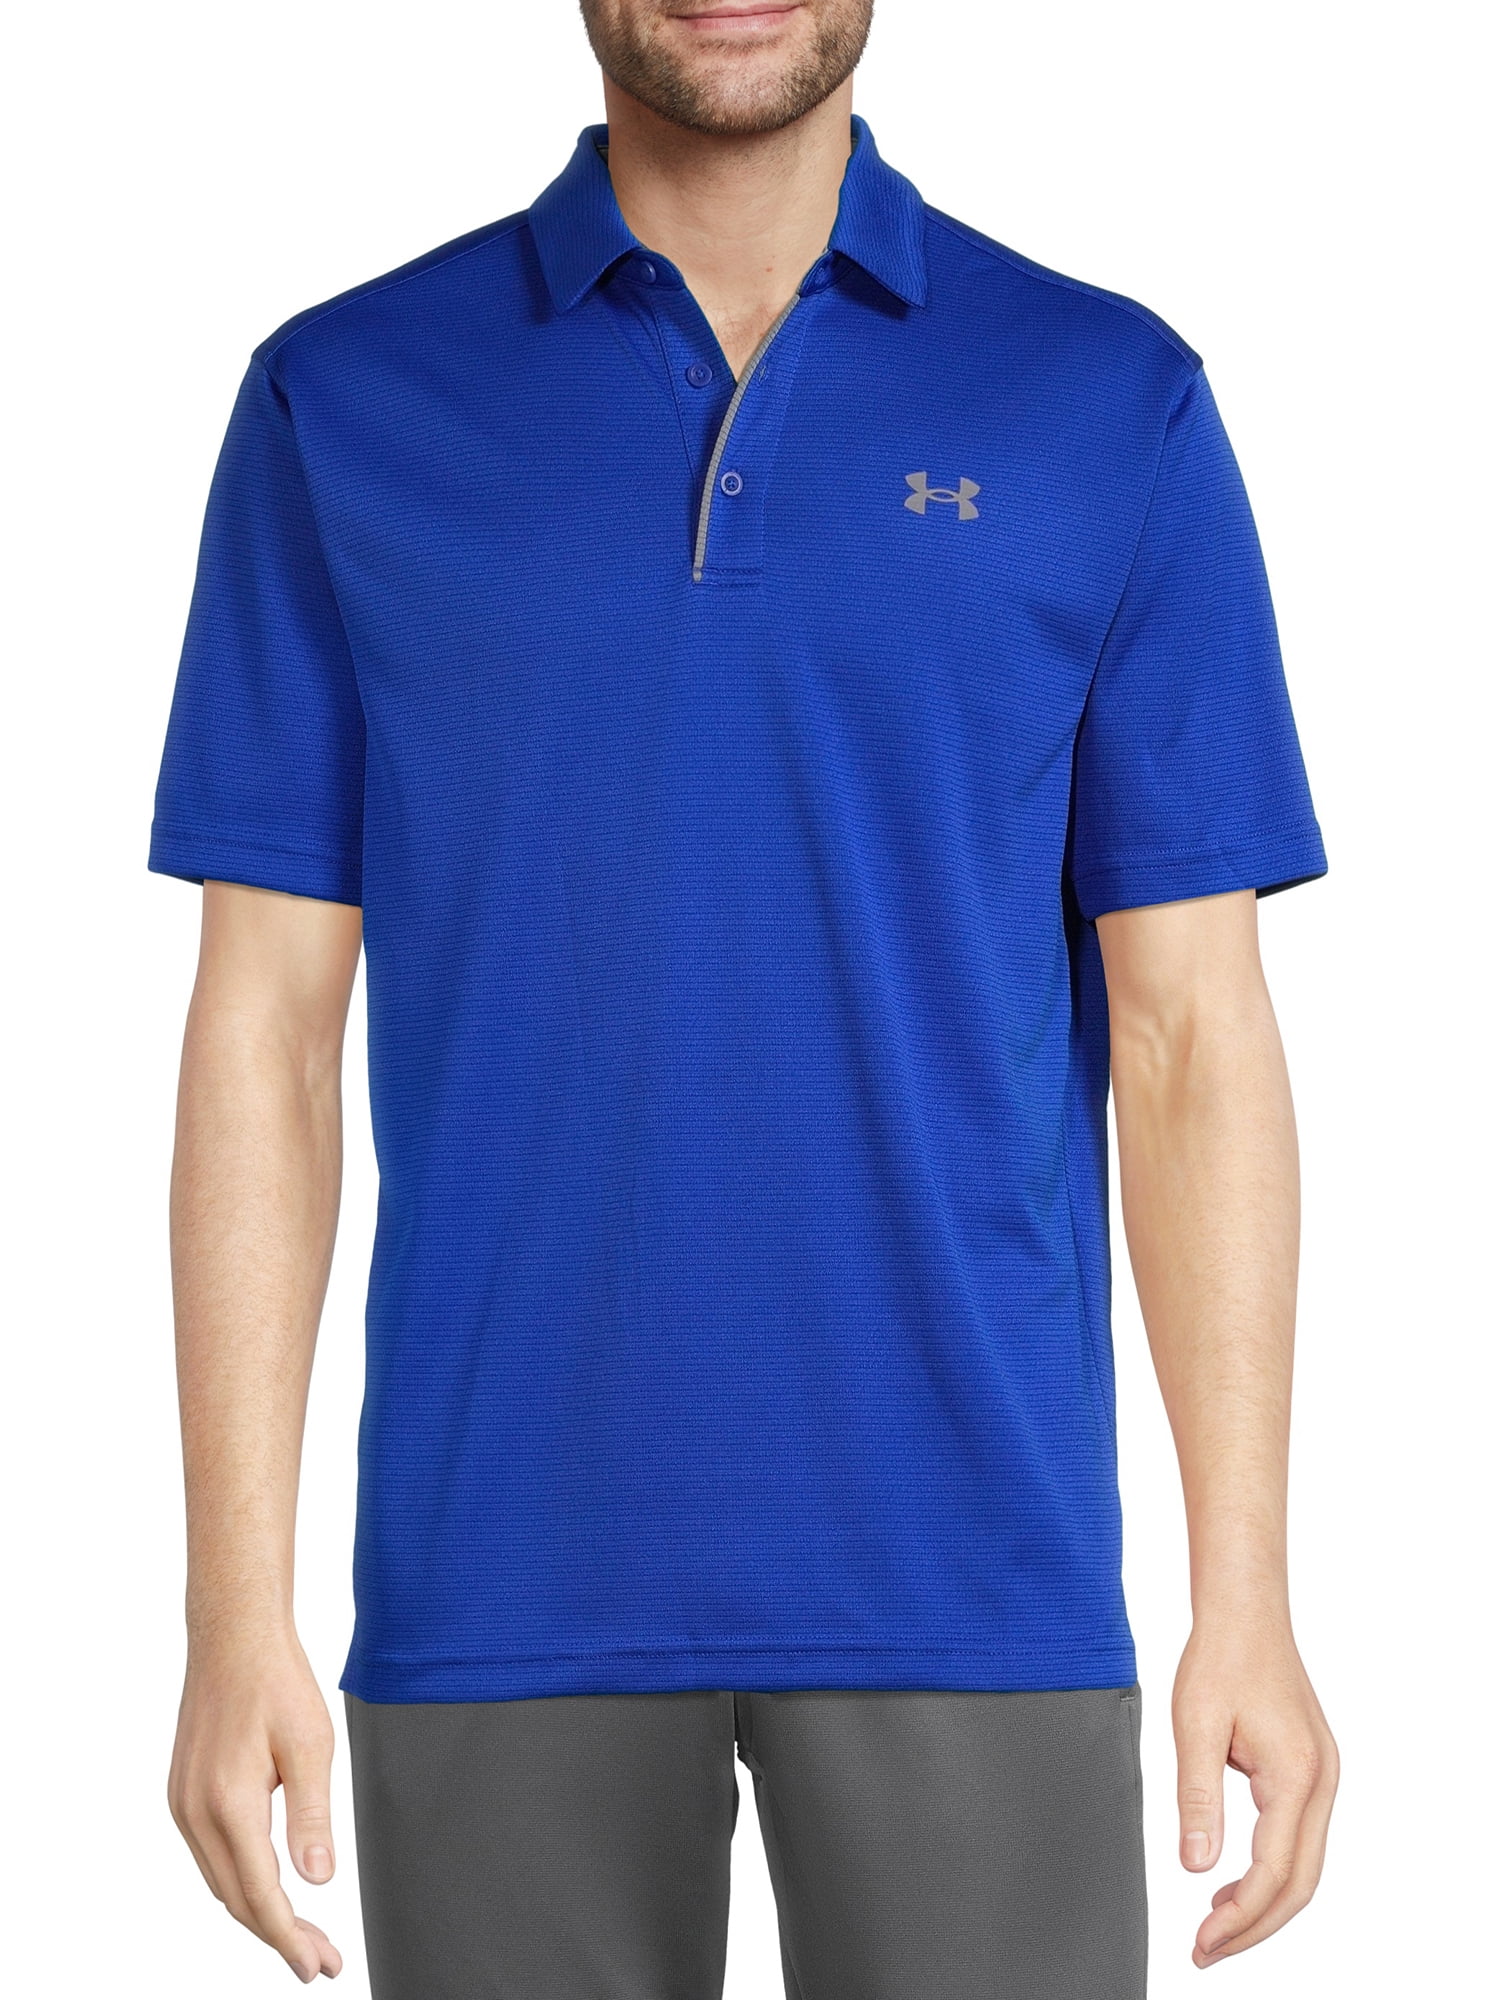 Comfortable Short Sleeve Polo Shirt Men Lightweight and Breathable Polo T Shirt for Men Under Armour Tech 